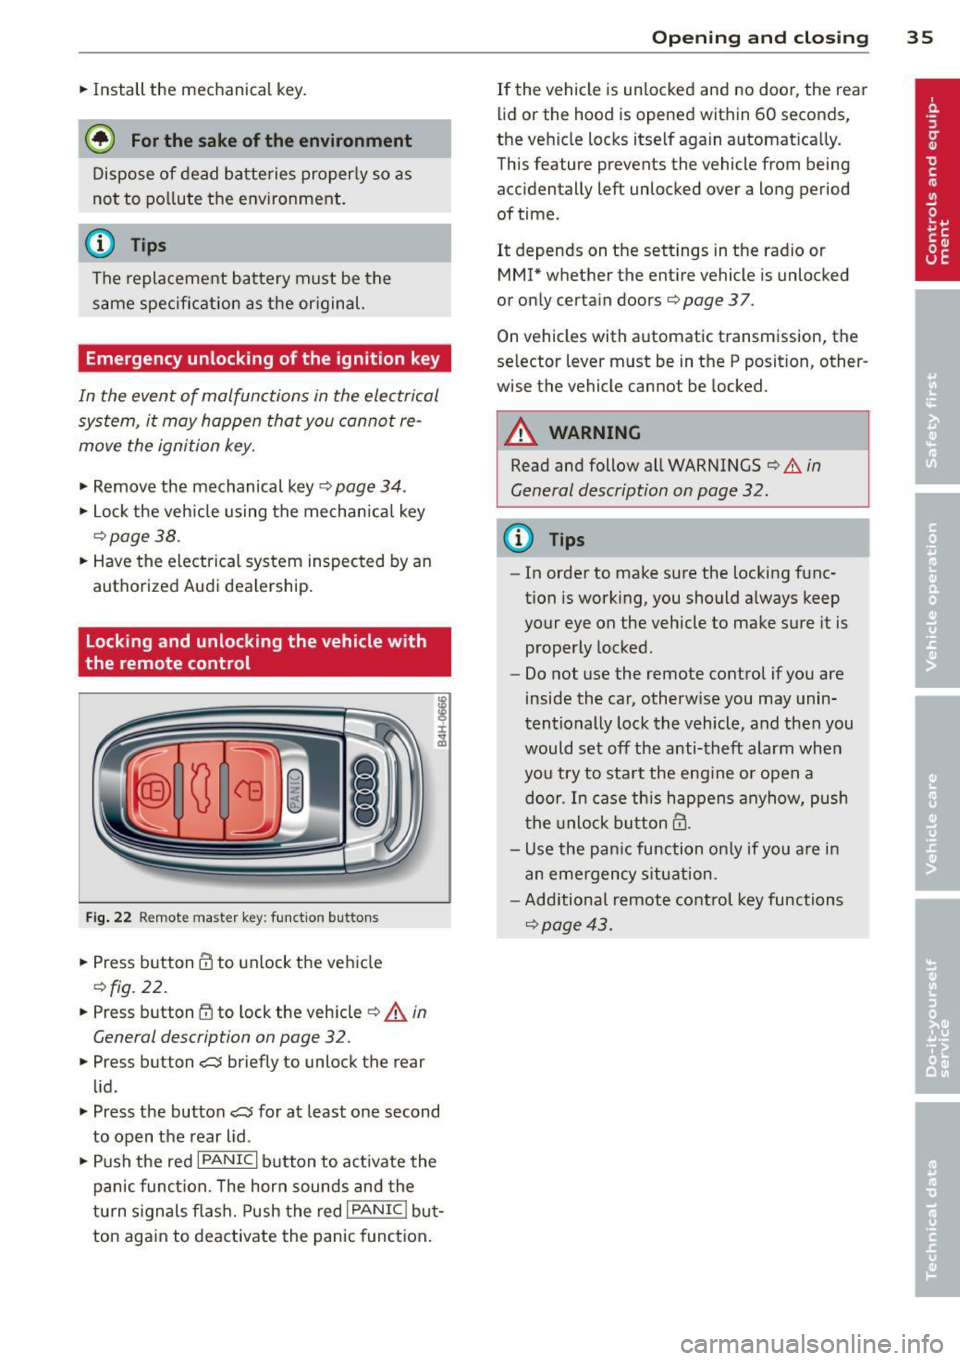 AUDI S4 2014 Owners Guide .. Install  the  mechanical  key. 
@J For the  sake of the  environment 
Dispose  of  dead  batteries  properly  so  as 
not  to  po llute  the  environment. 
(j) Tip s 
The  replacement  bat tery  mu